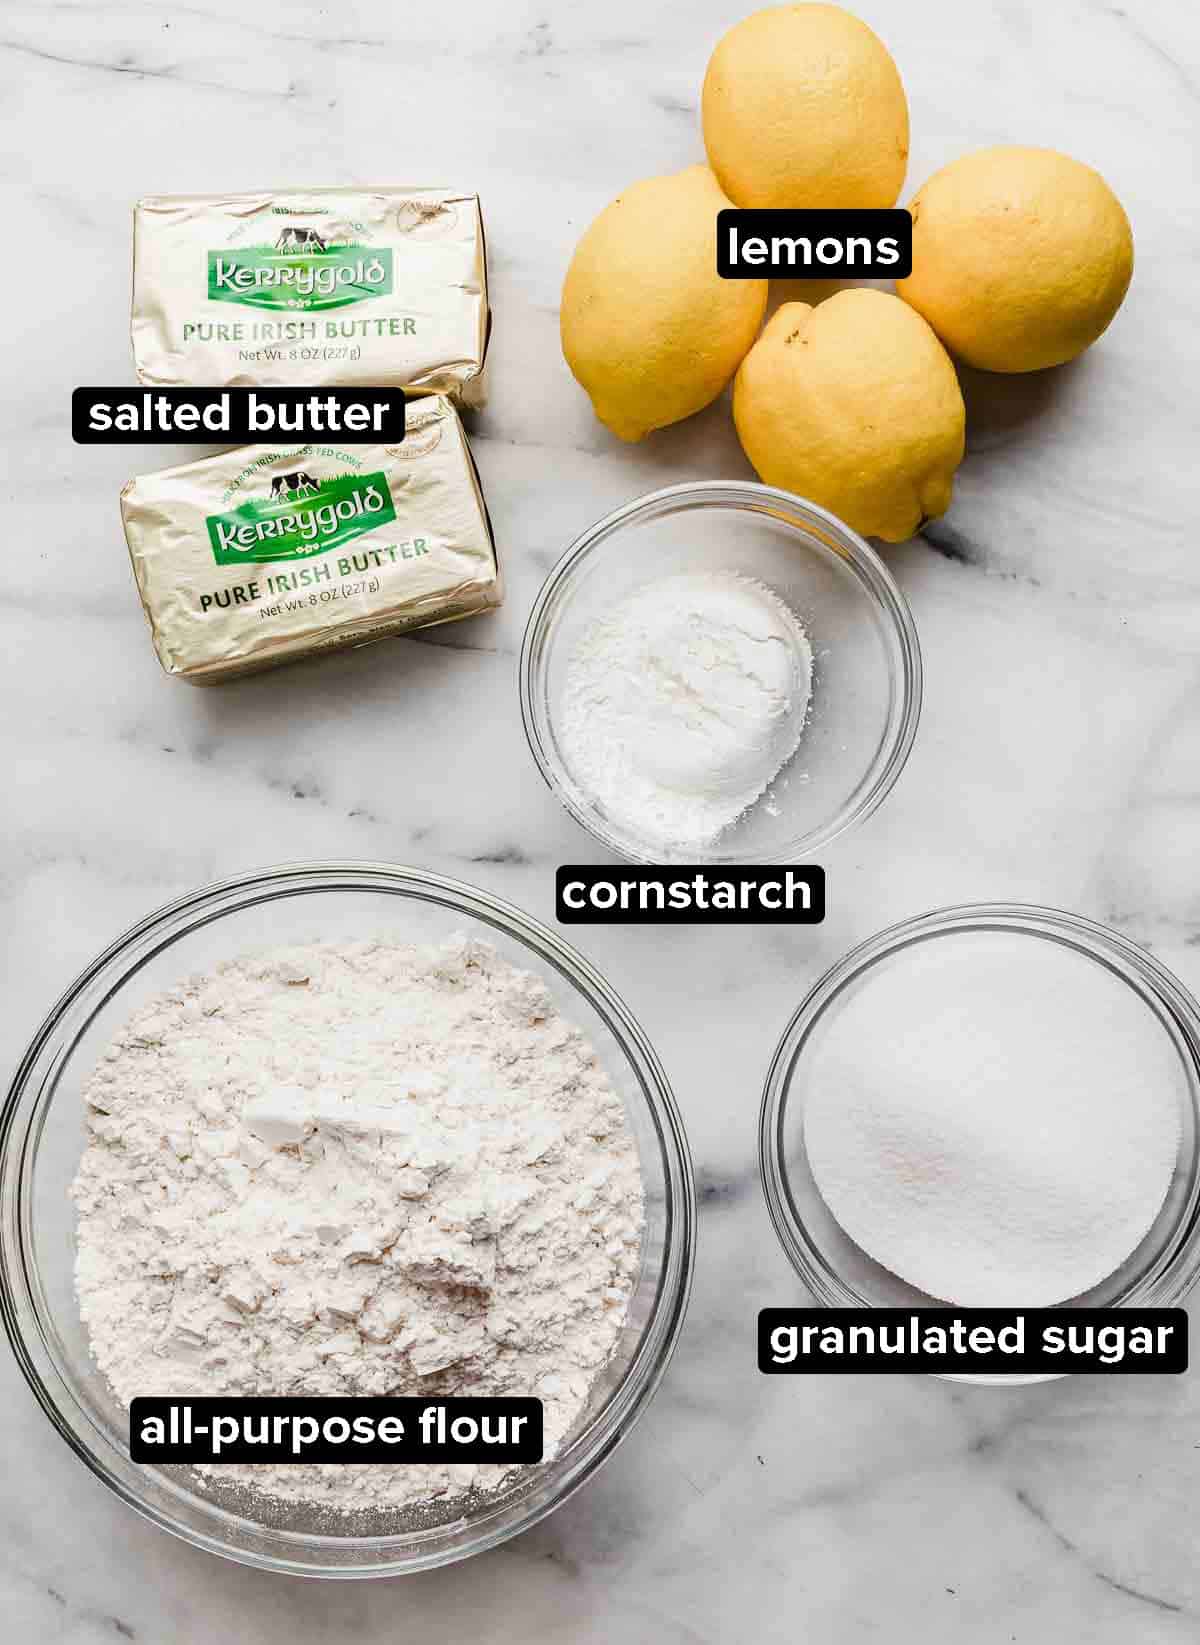 Lemon Shortbread Cookies ingredients portioned into glass bowls on a white and gray marble background: butter, flour, lemons, cornstarch.